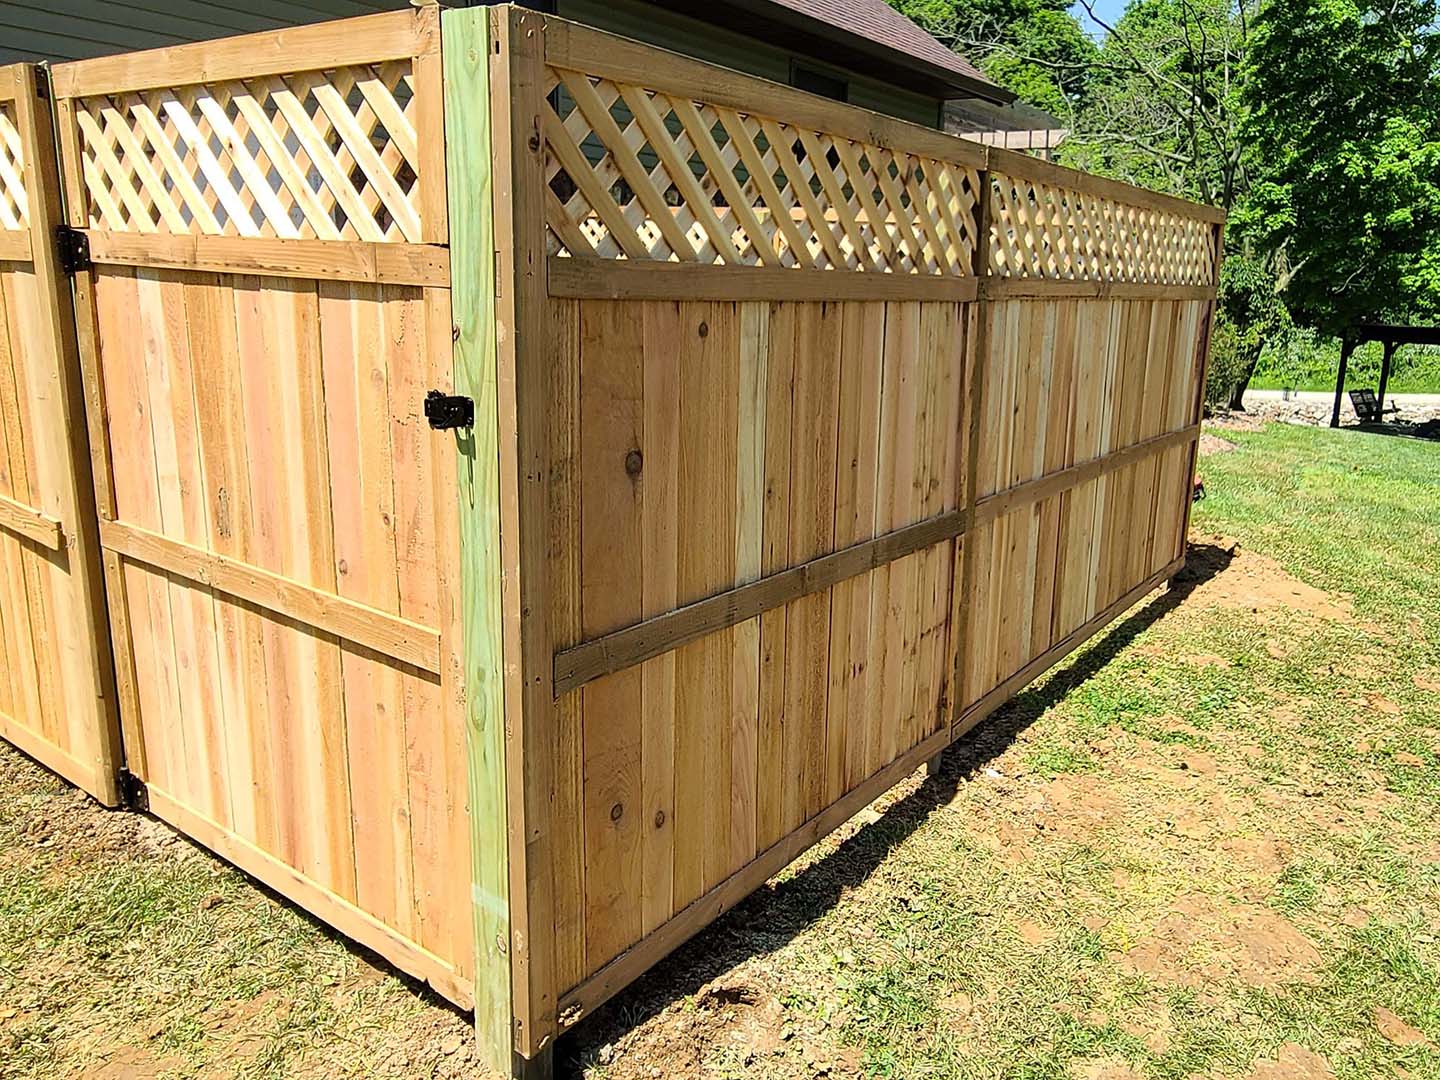 Linton Indiana residential fencing